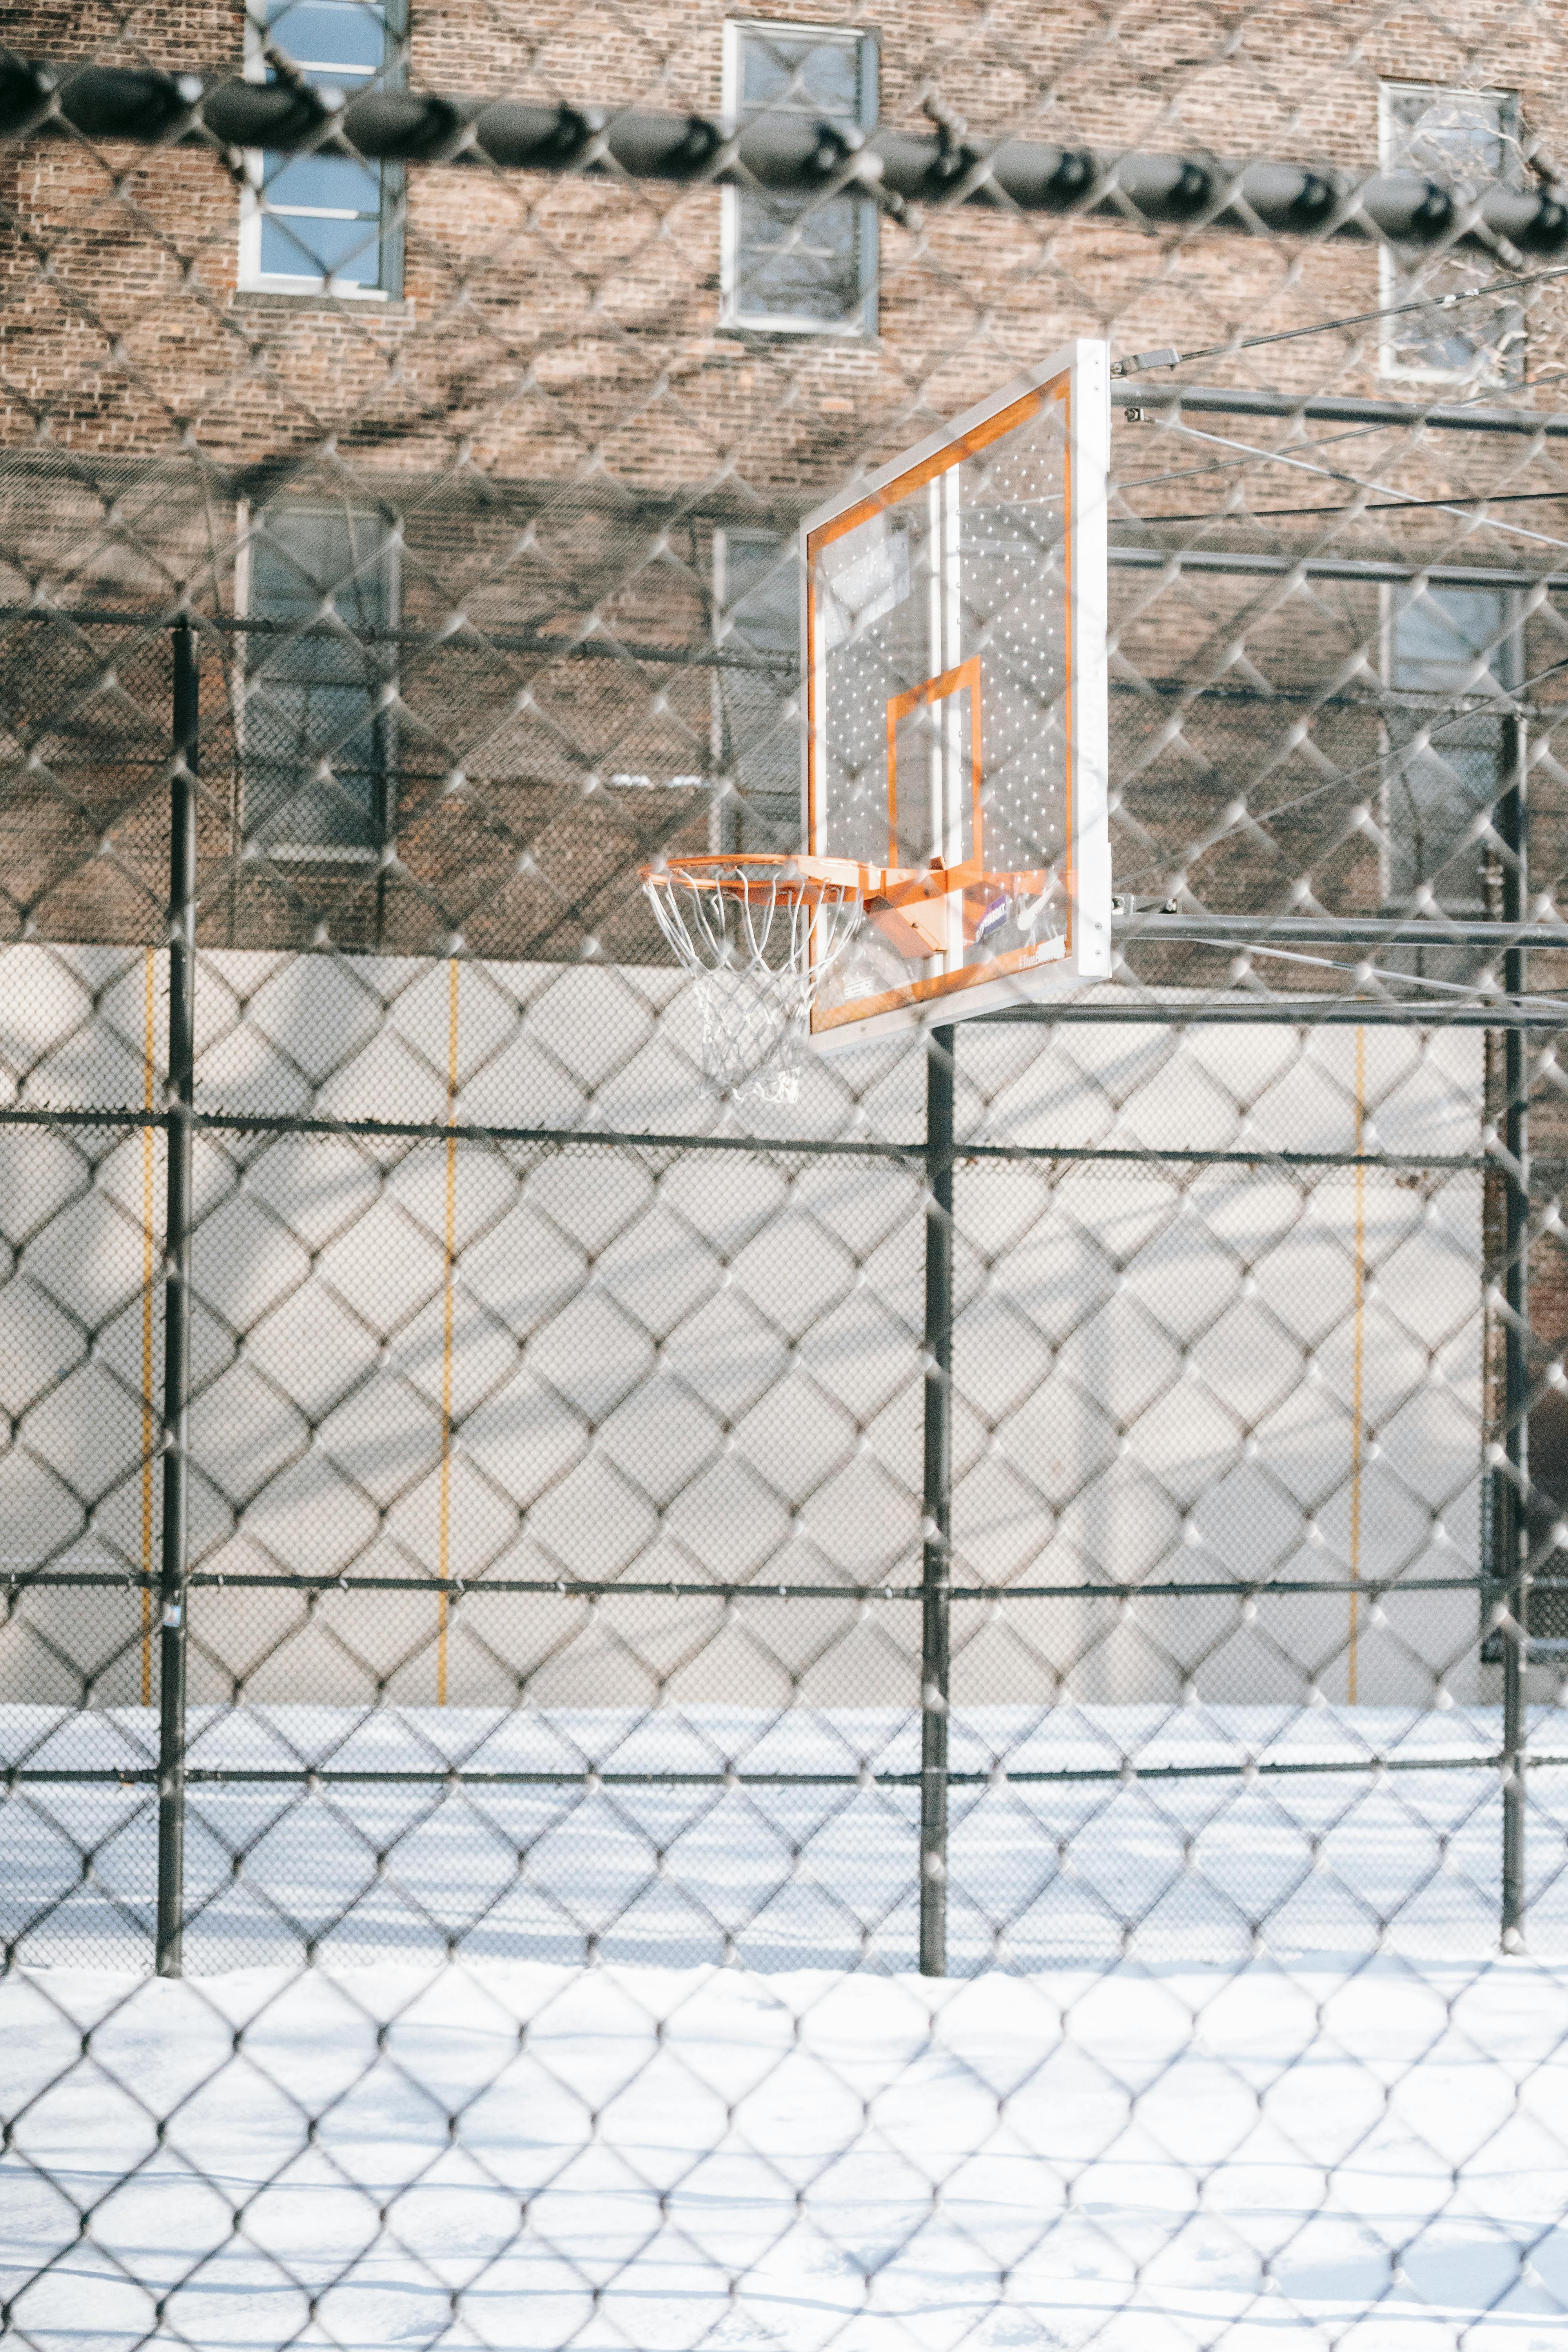 through chain link fence of basketball hoop on sports ground